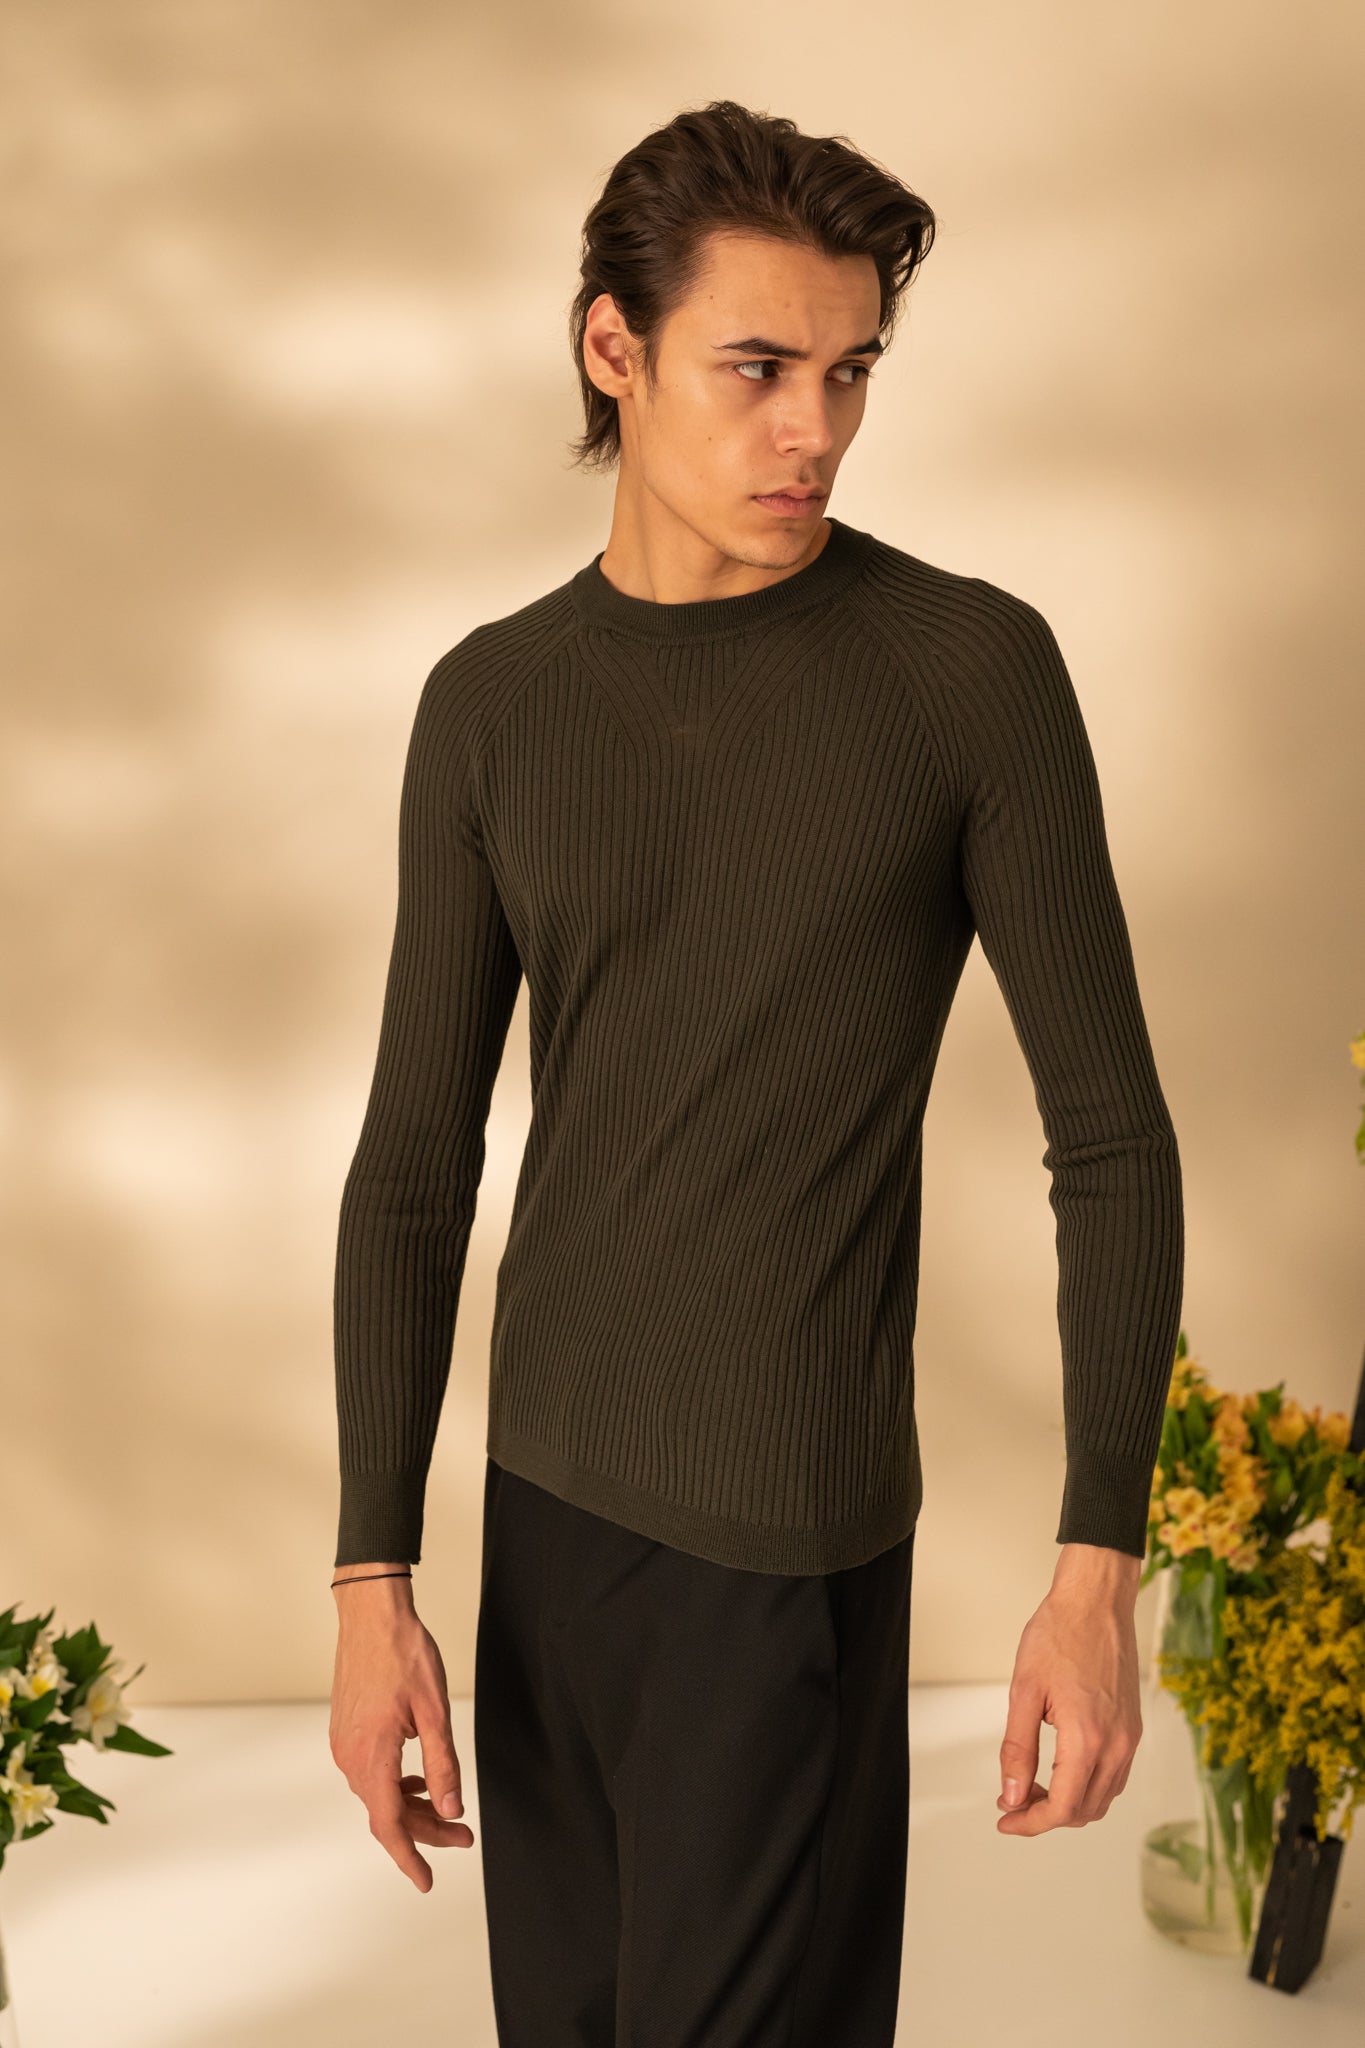 Round neck sweater for men